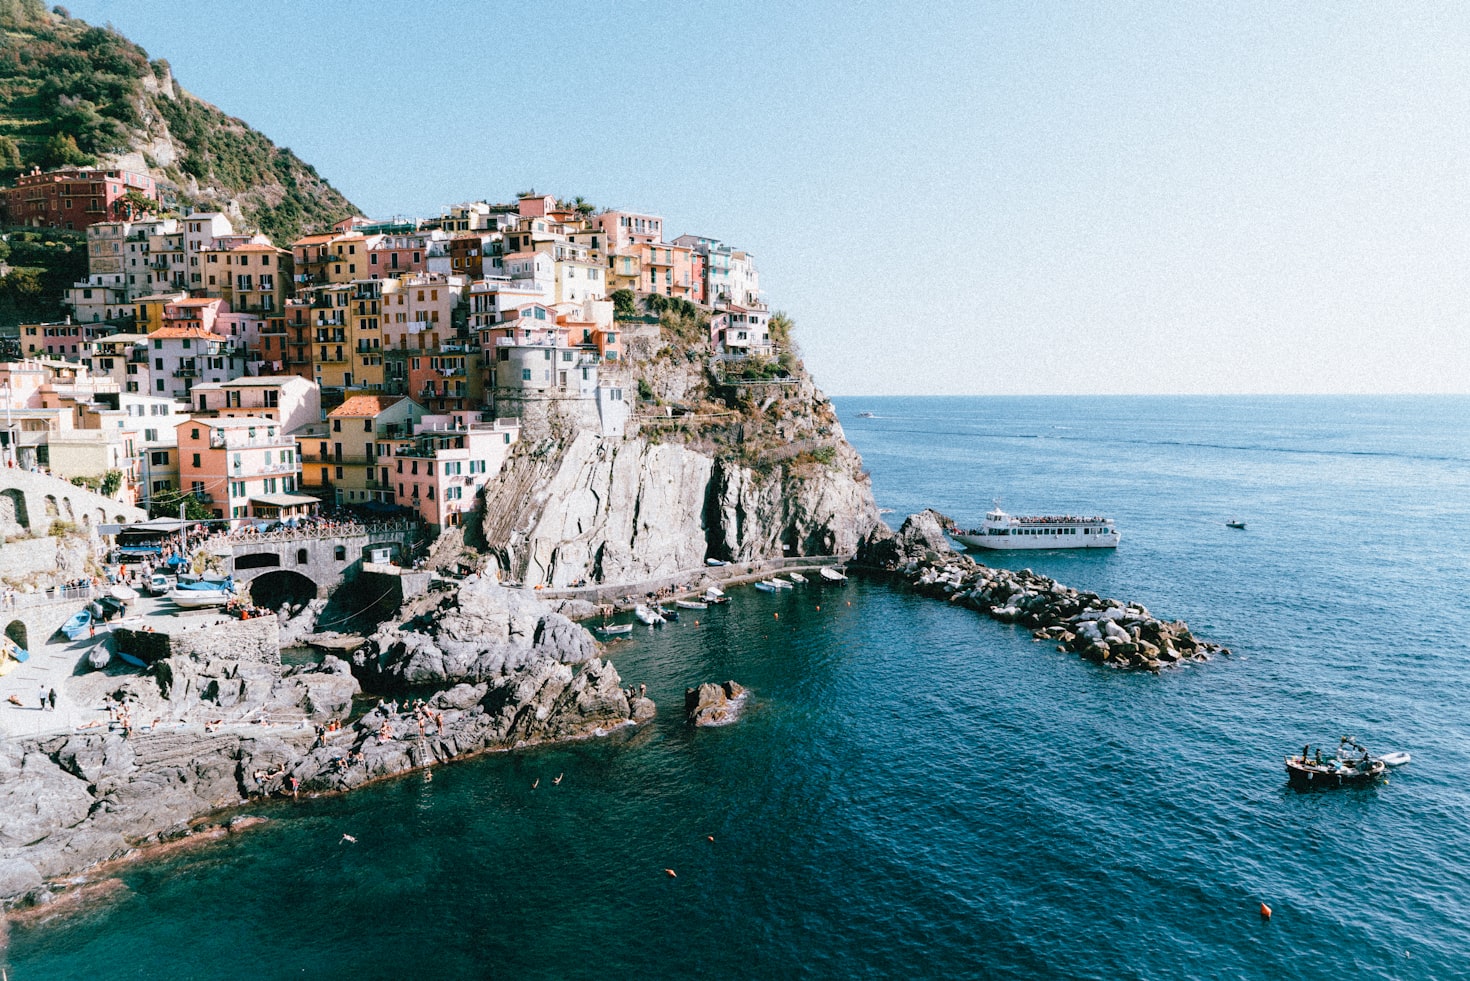 Manarola, Italy European Union is the World's Largest Trading Block: With a Population of Over 500 Million